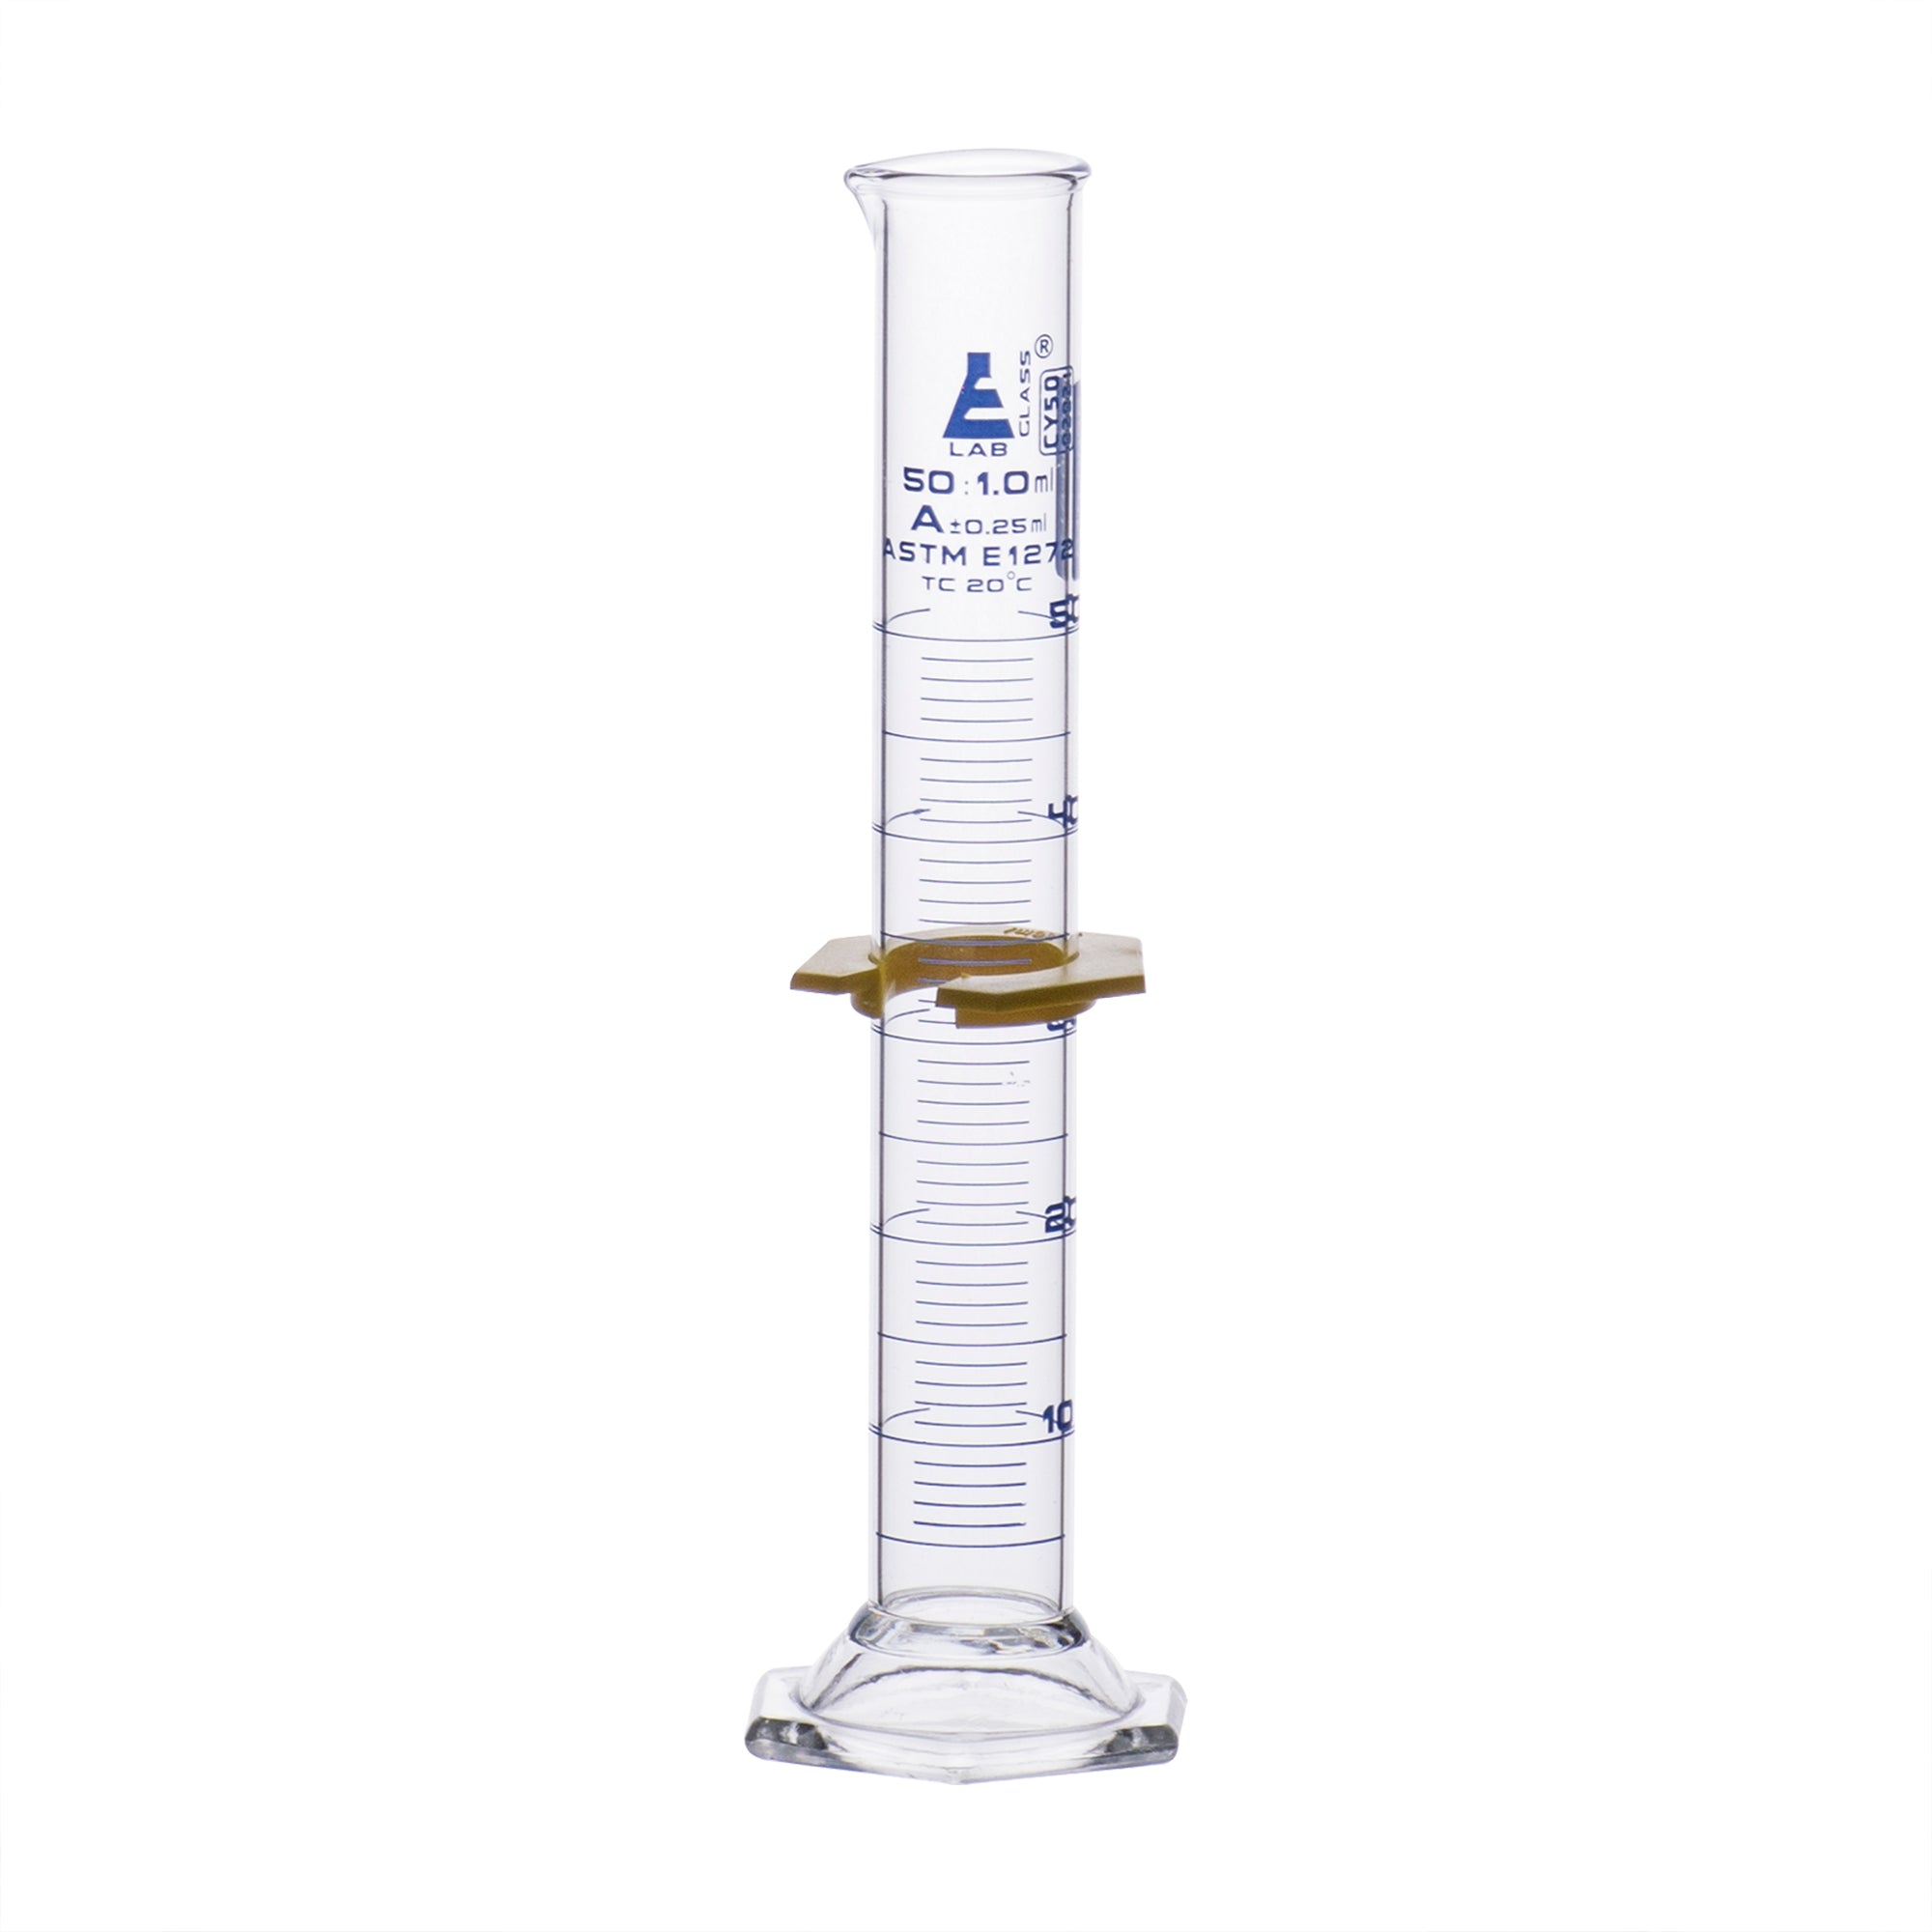 Borosilicate Glass ASTM Graduated Cylinder with Hexagonal Base and Guard, 50 ml, Class A with USP & Individual Work Certificate, Autoclavable